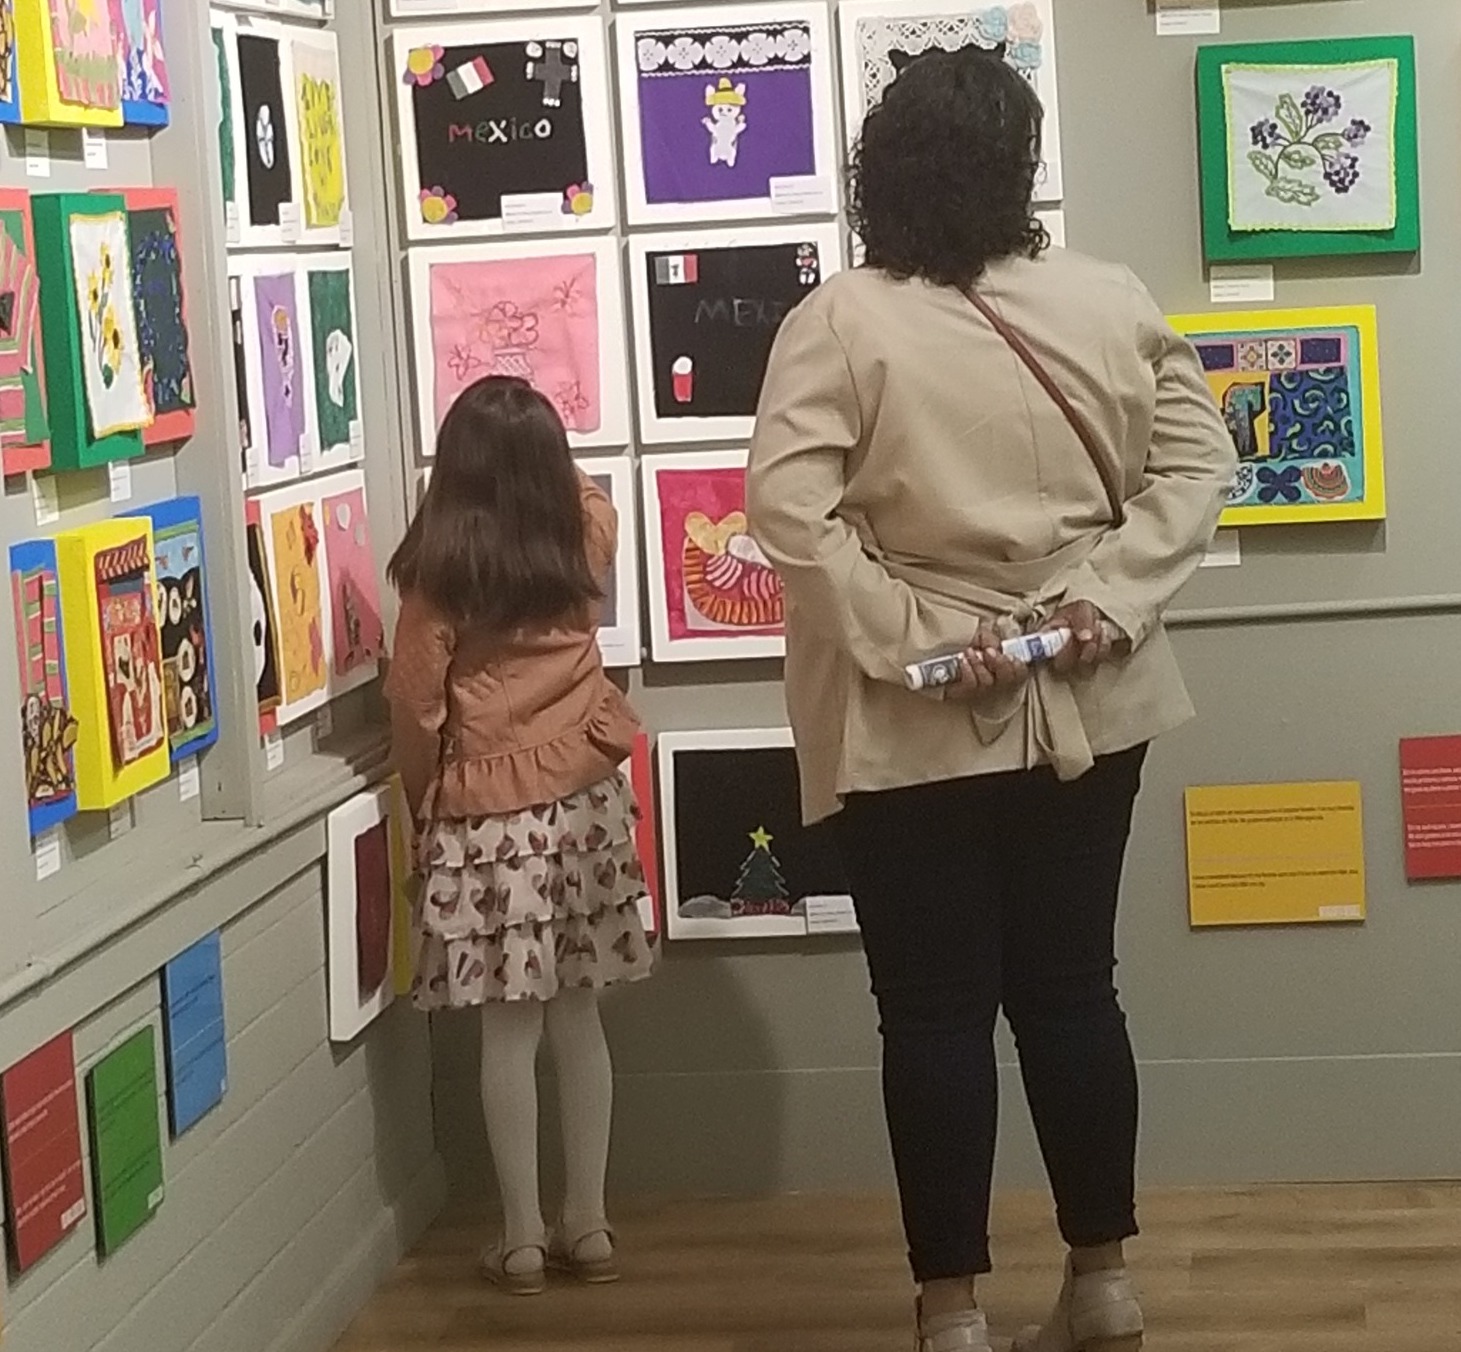 SHHS Hilos Visible exhibit celebrating the Hispanic culture in St. Helena